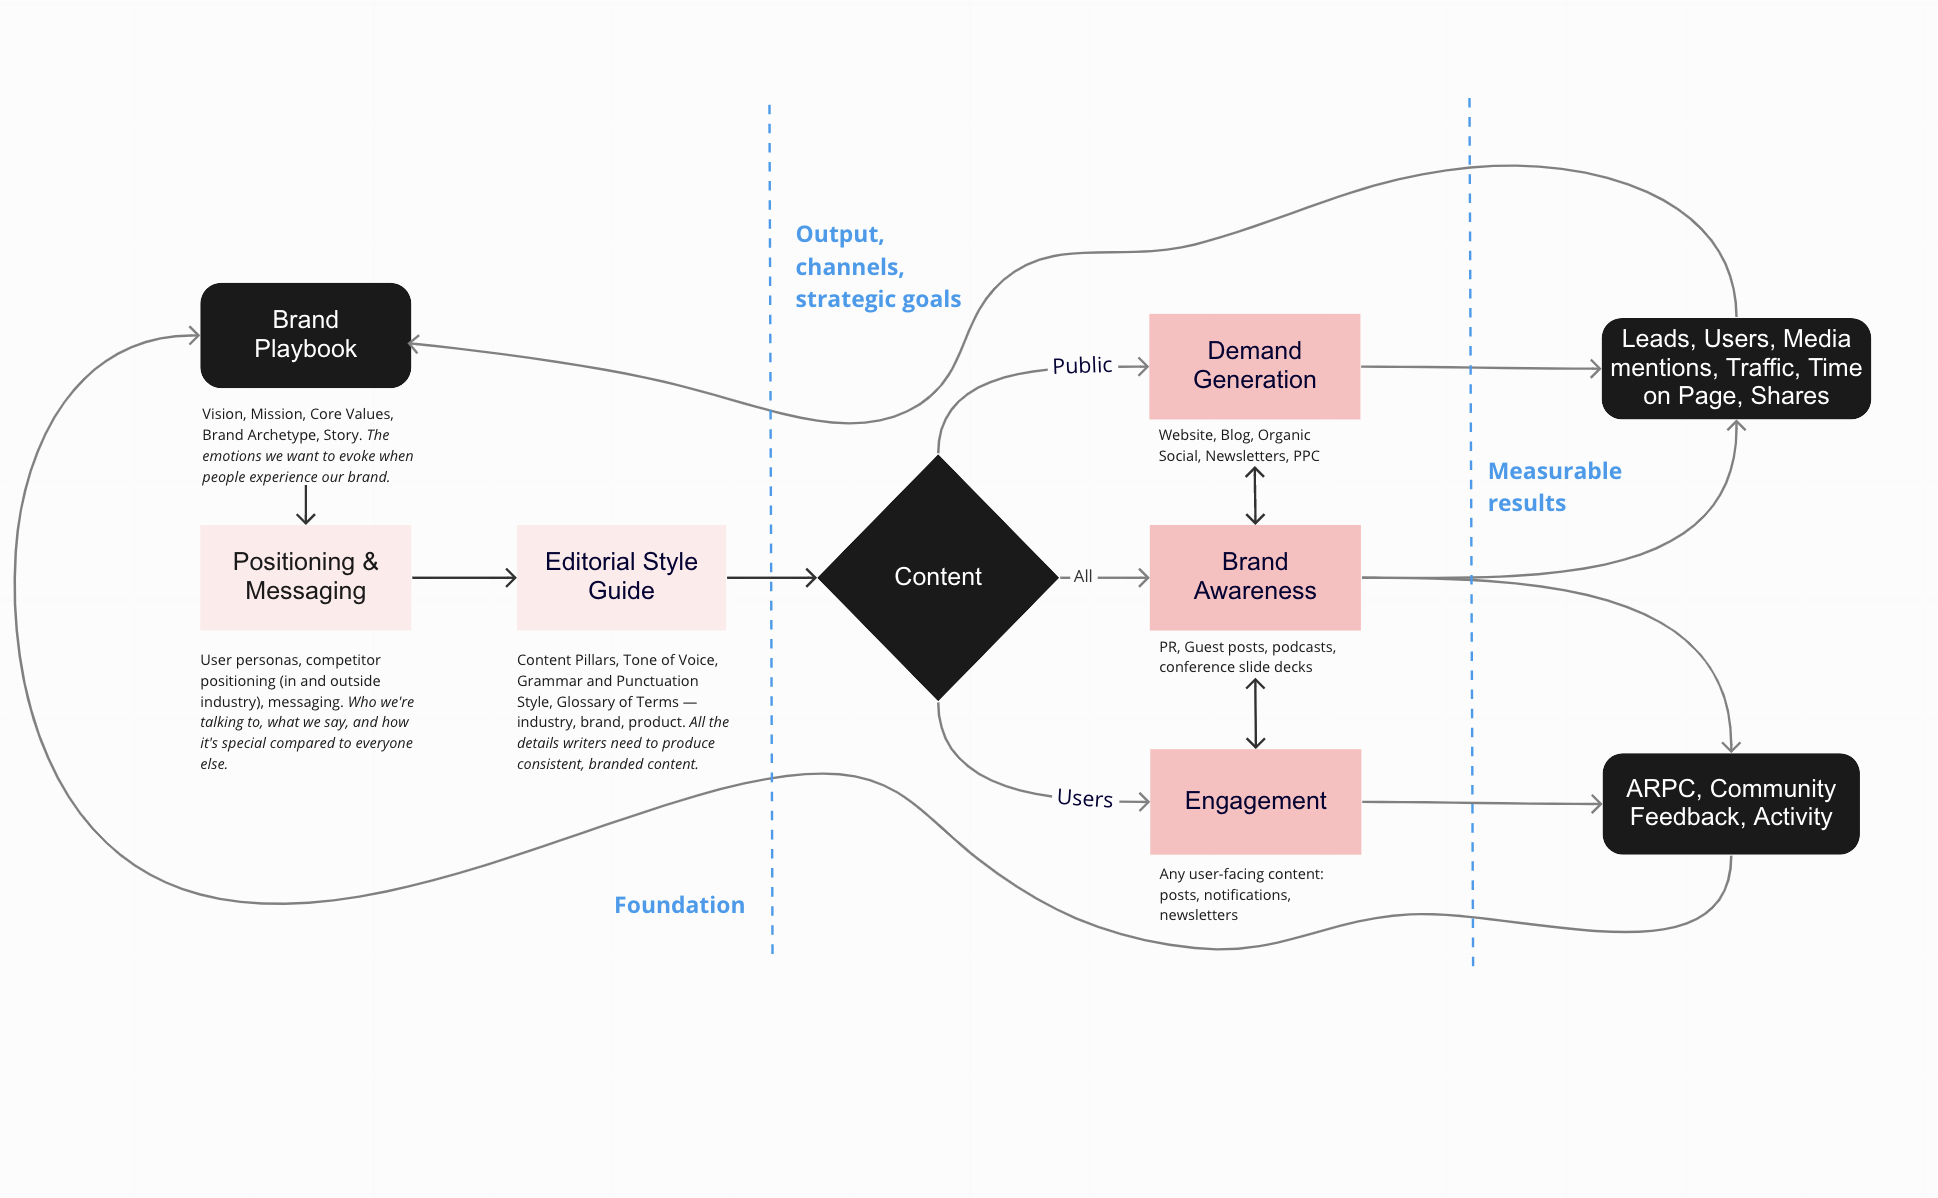 Content as a Part of the Brand System Diagram